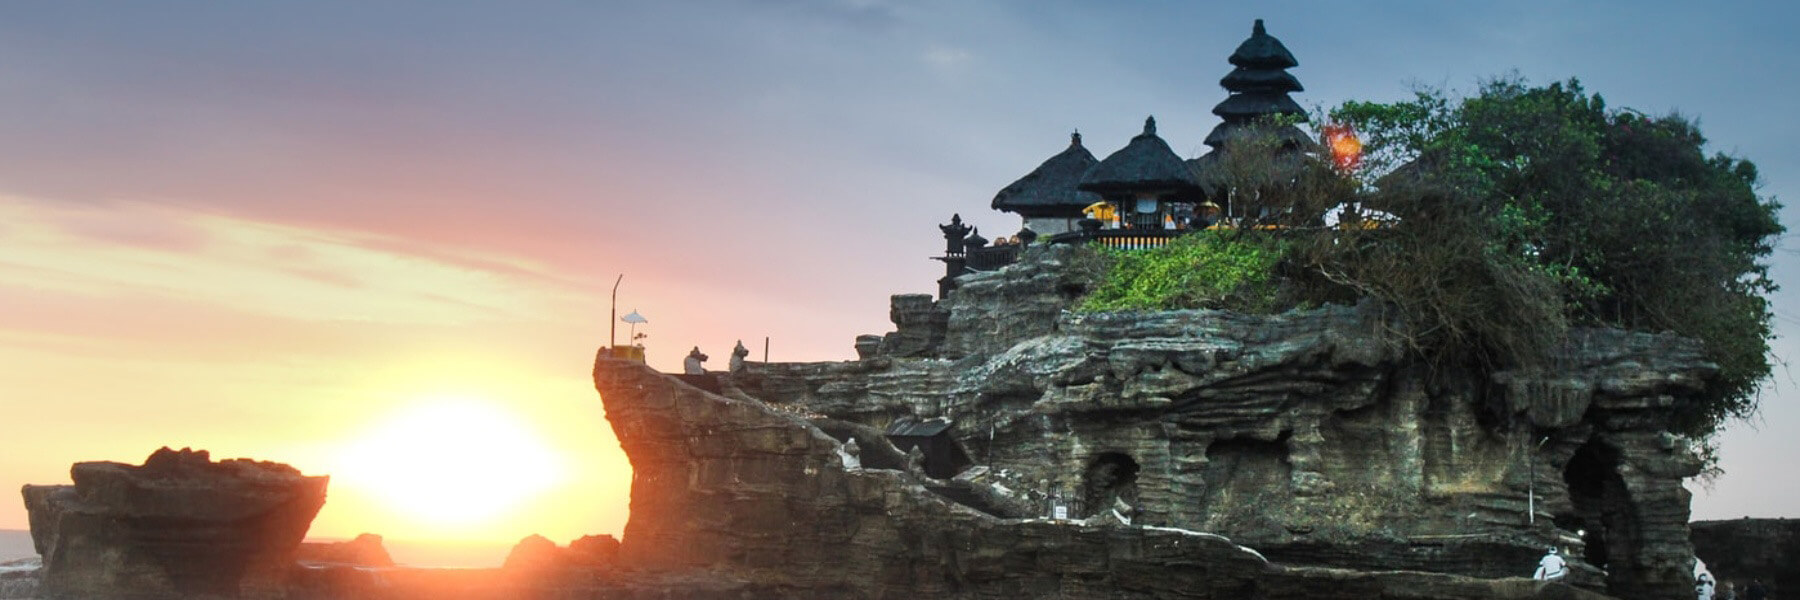 The temple Pura Tanah, perched high on the rock, facing the wide-open ocean.